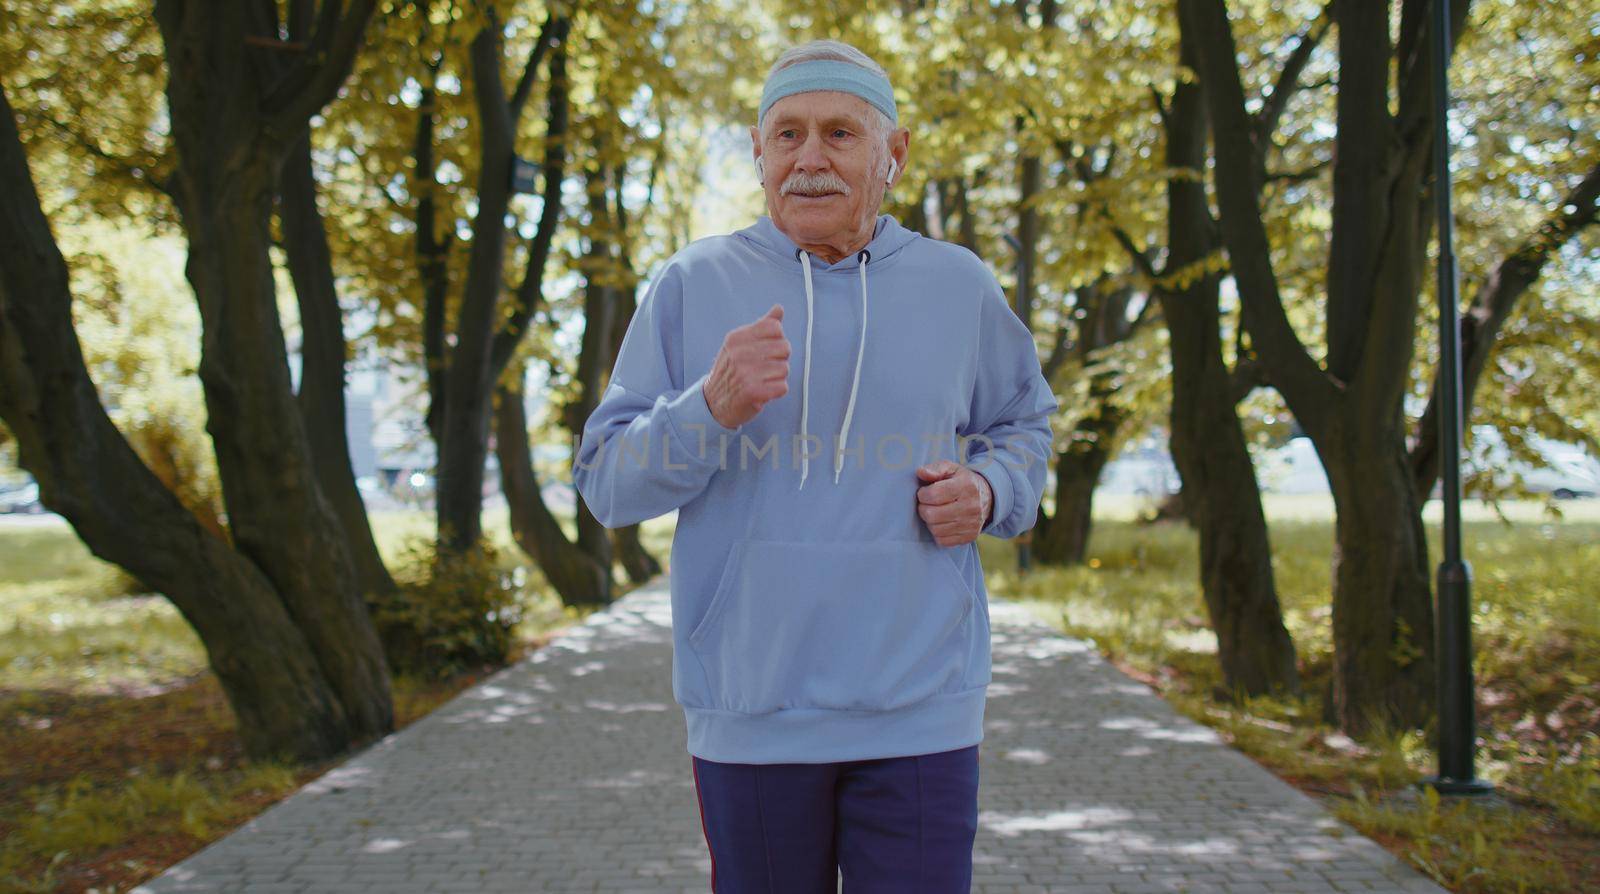 Athletic fitness senior elderly sport runner man training, listening music in earphones. Workout cardio outside in park at morning. Grandfather enjoying healthy lifestyle. Active retired mature people